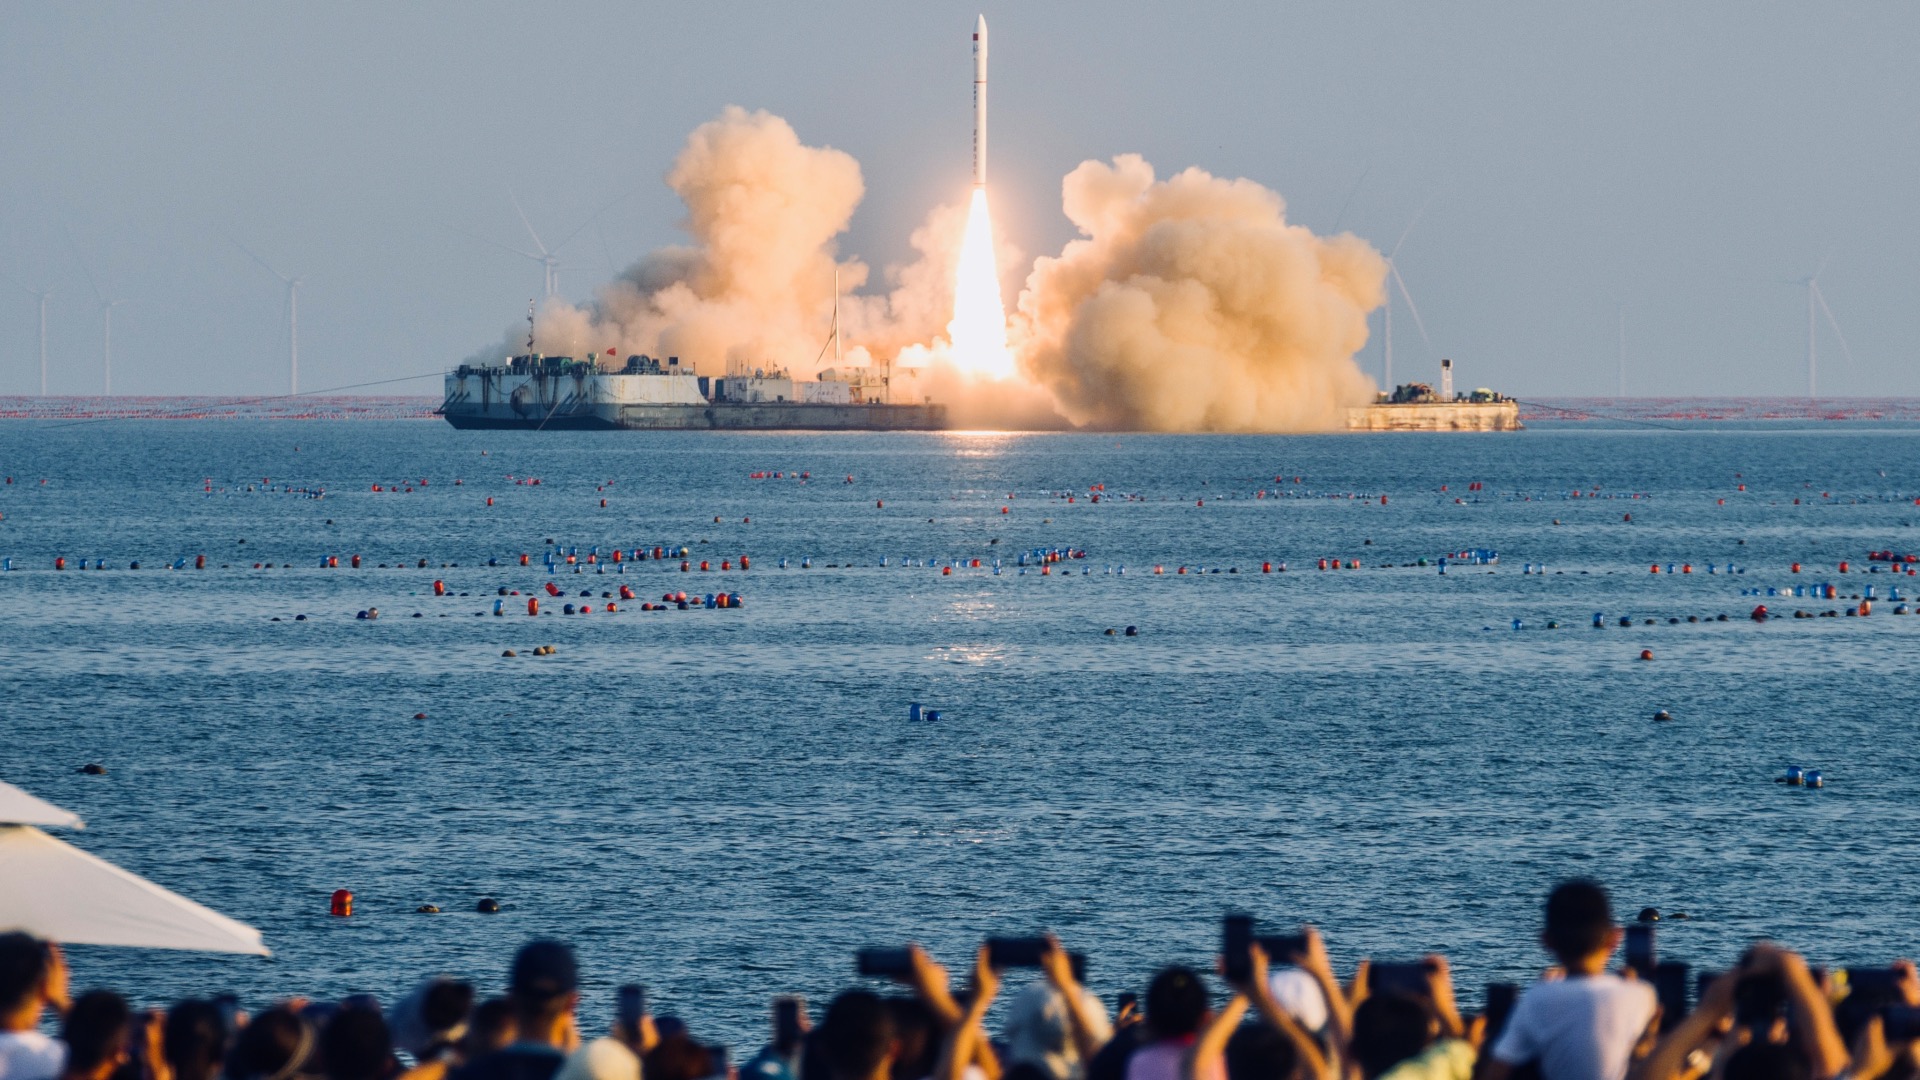 China launches a CERES-1 Y1 carrier rocket from a mobile launch platform in the Yellow Sea off the coast of East China's Shandong Province, sending four satellites into preset orbit, September 5, 2023. /CGTN